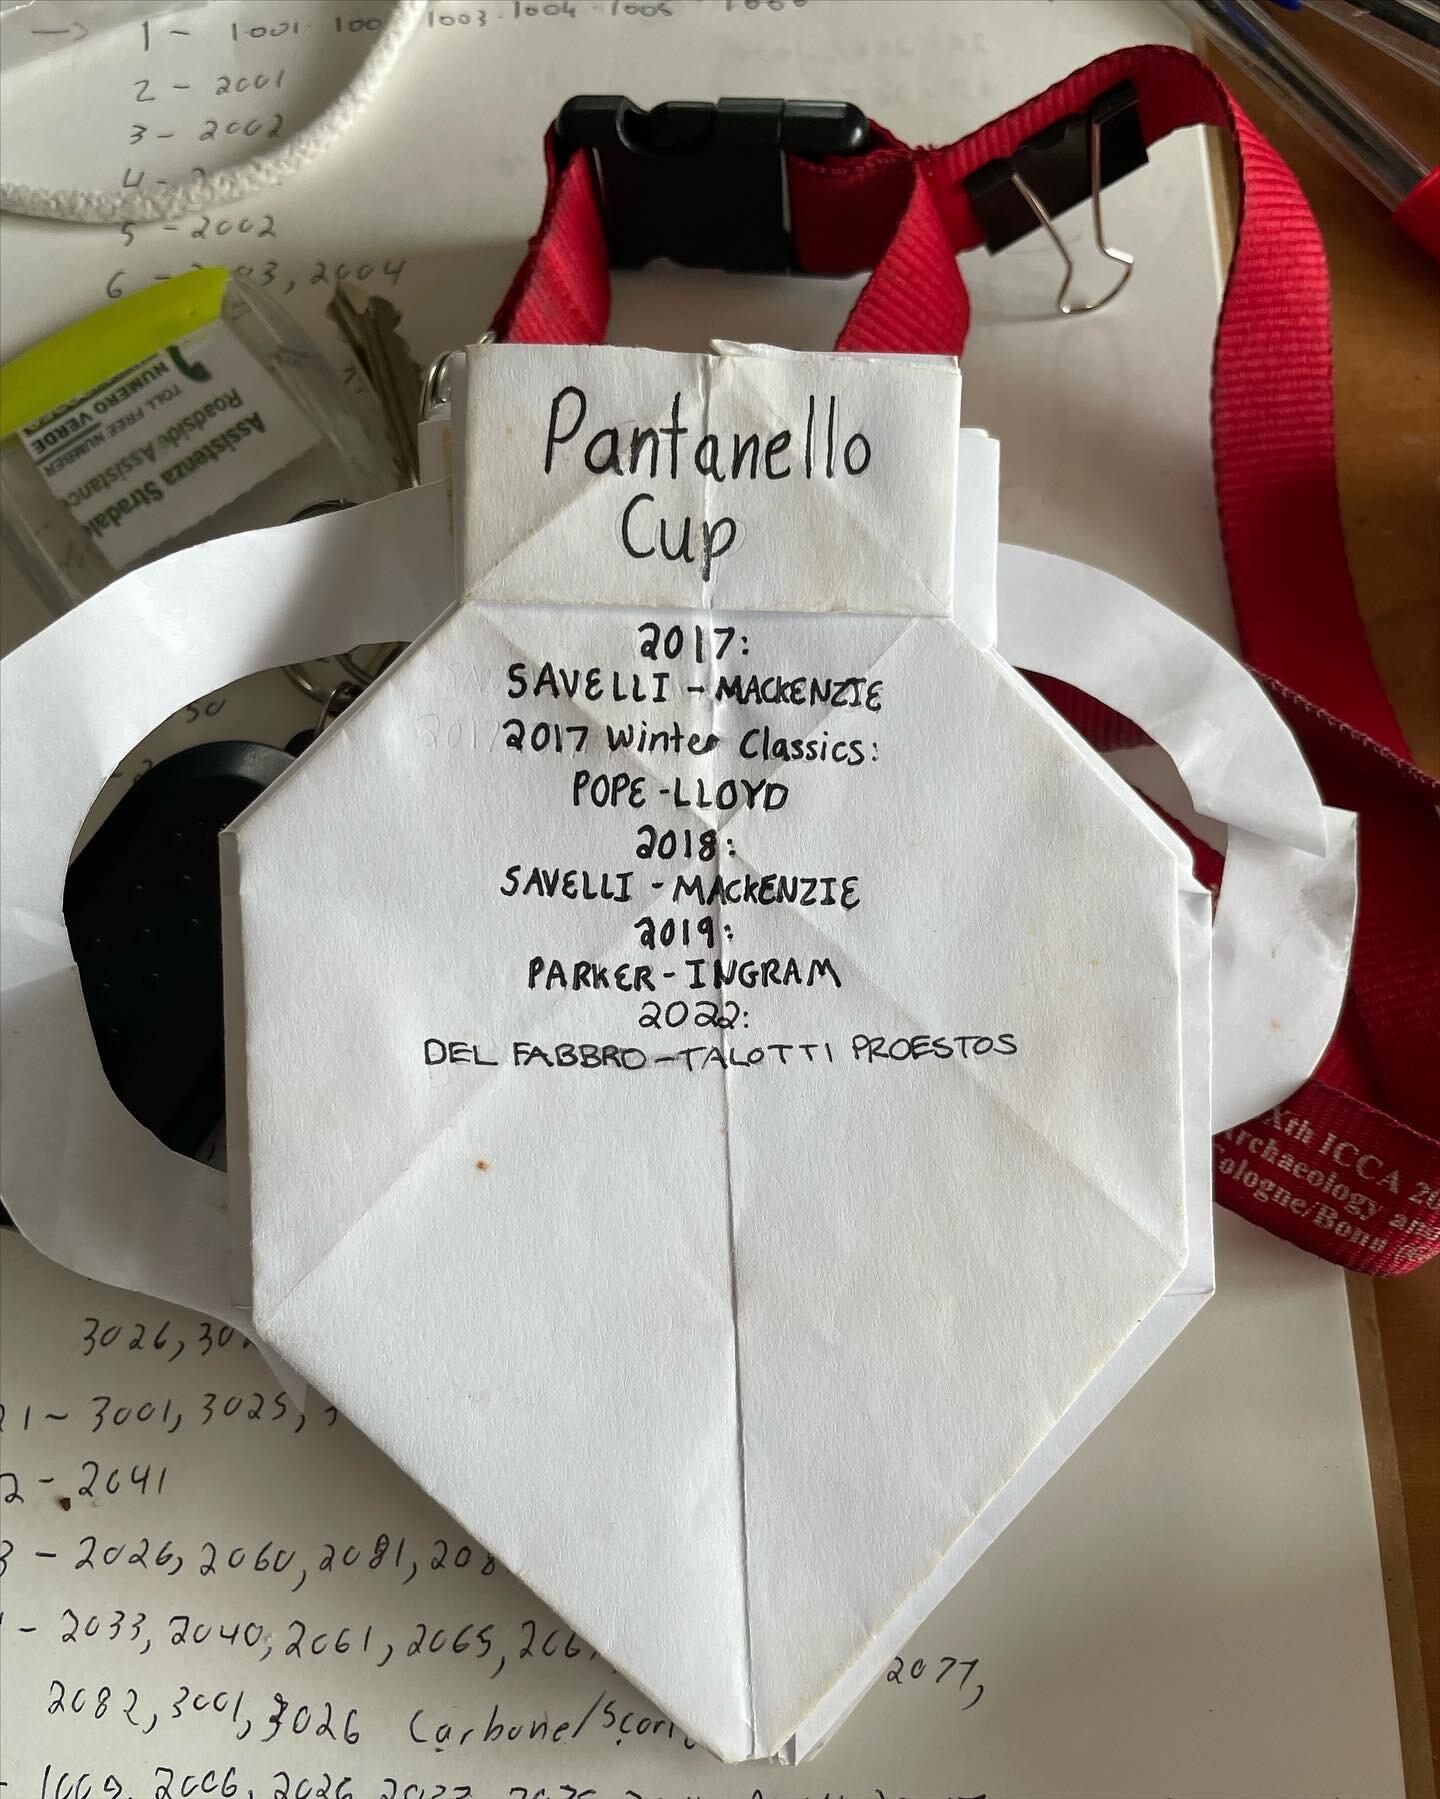 Of all the special finds recovered on the excavation, this one is the most special. The esteemed Pantanello Cup is the trophy of the scopa card tournament held at the end of the season (and sometimes in winter). Congratulations to all past winners an